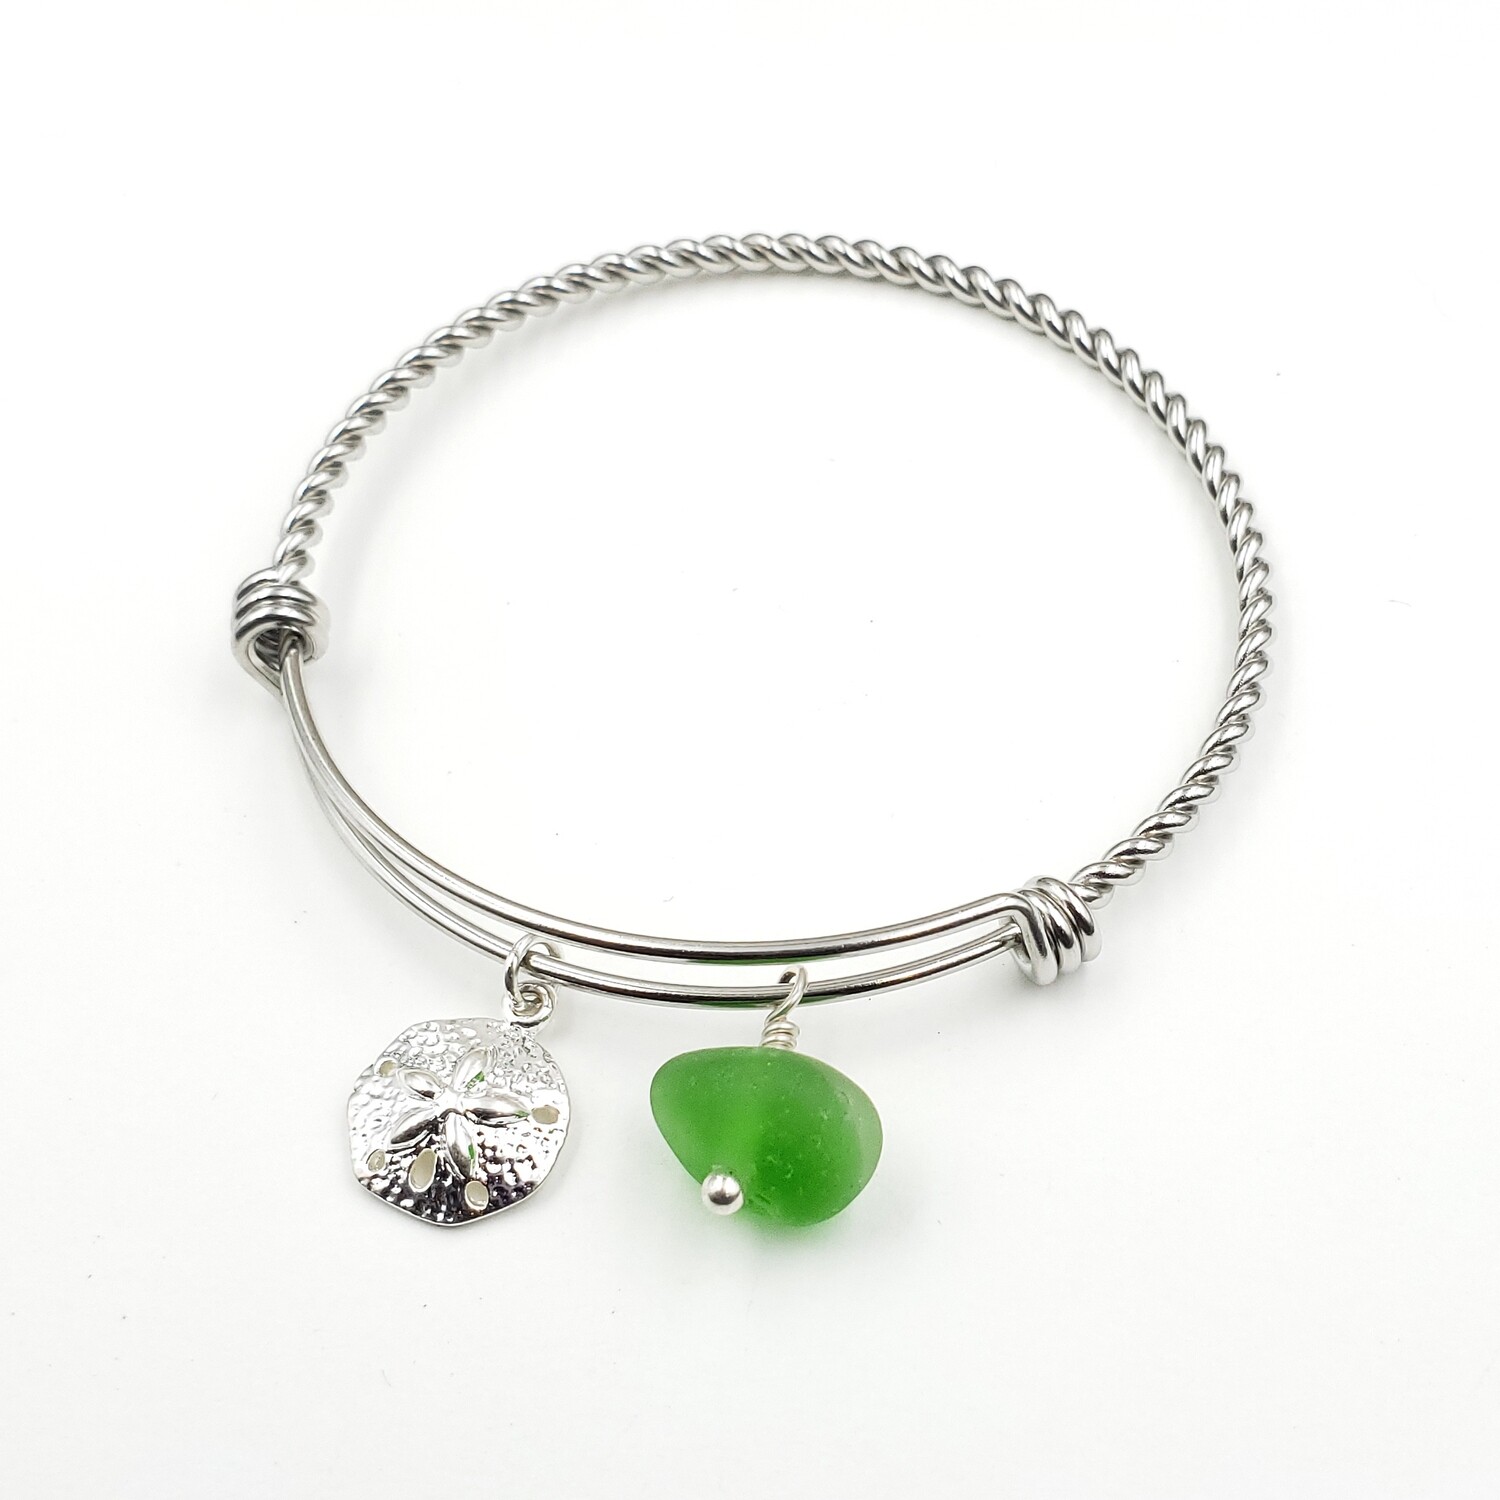 Twisted Bangle Bracelet with Sanddollar Charm and Green Lake Erie Beach Glass